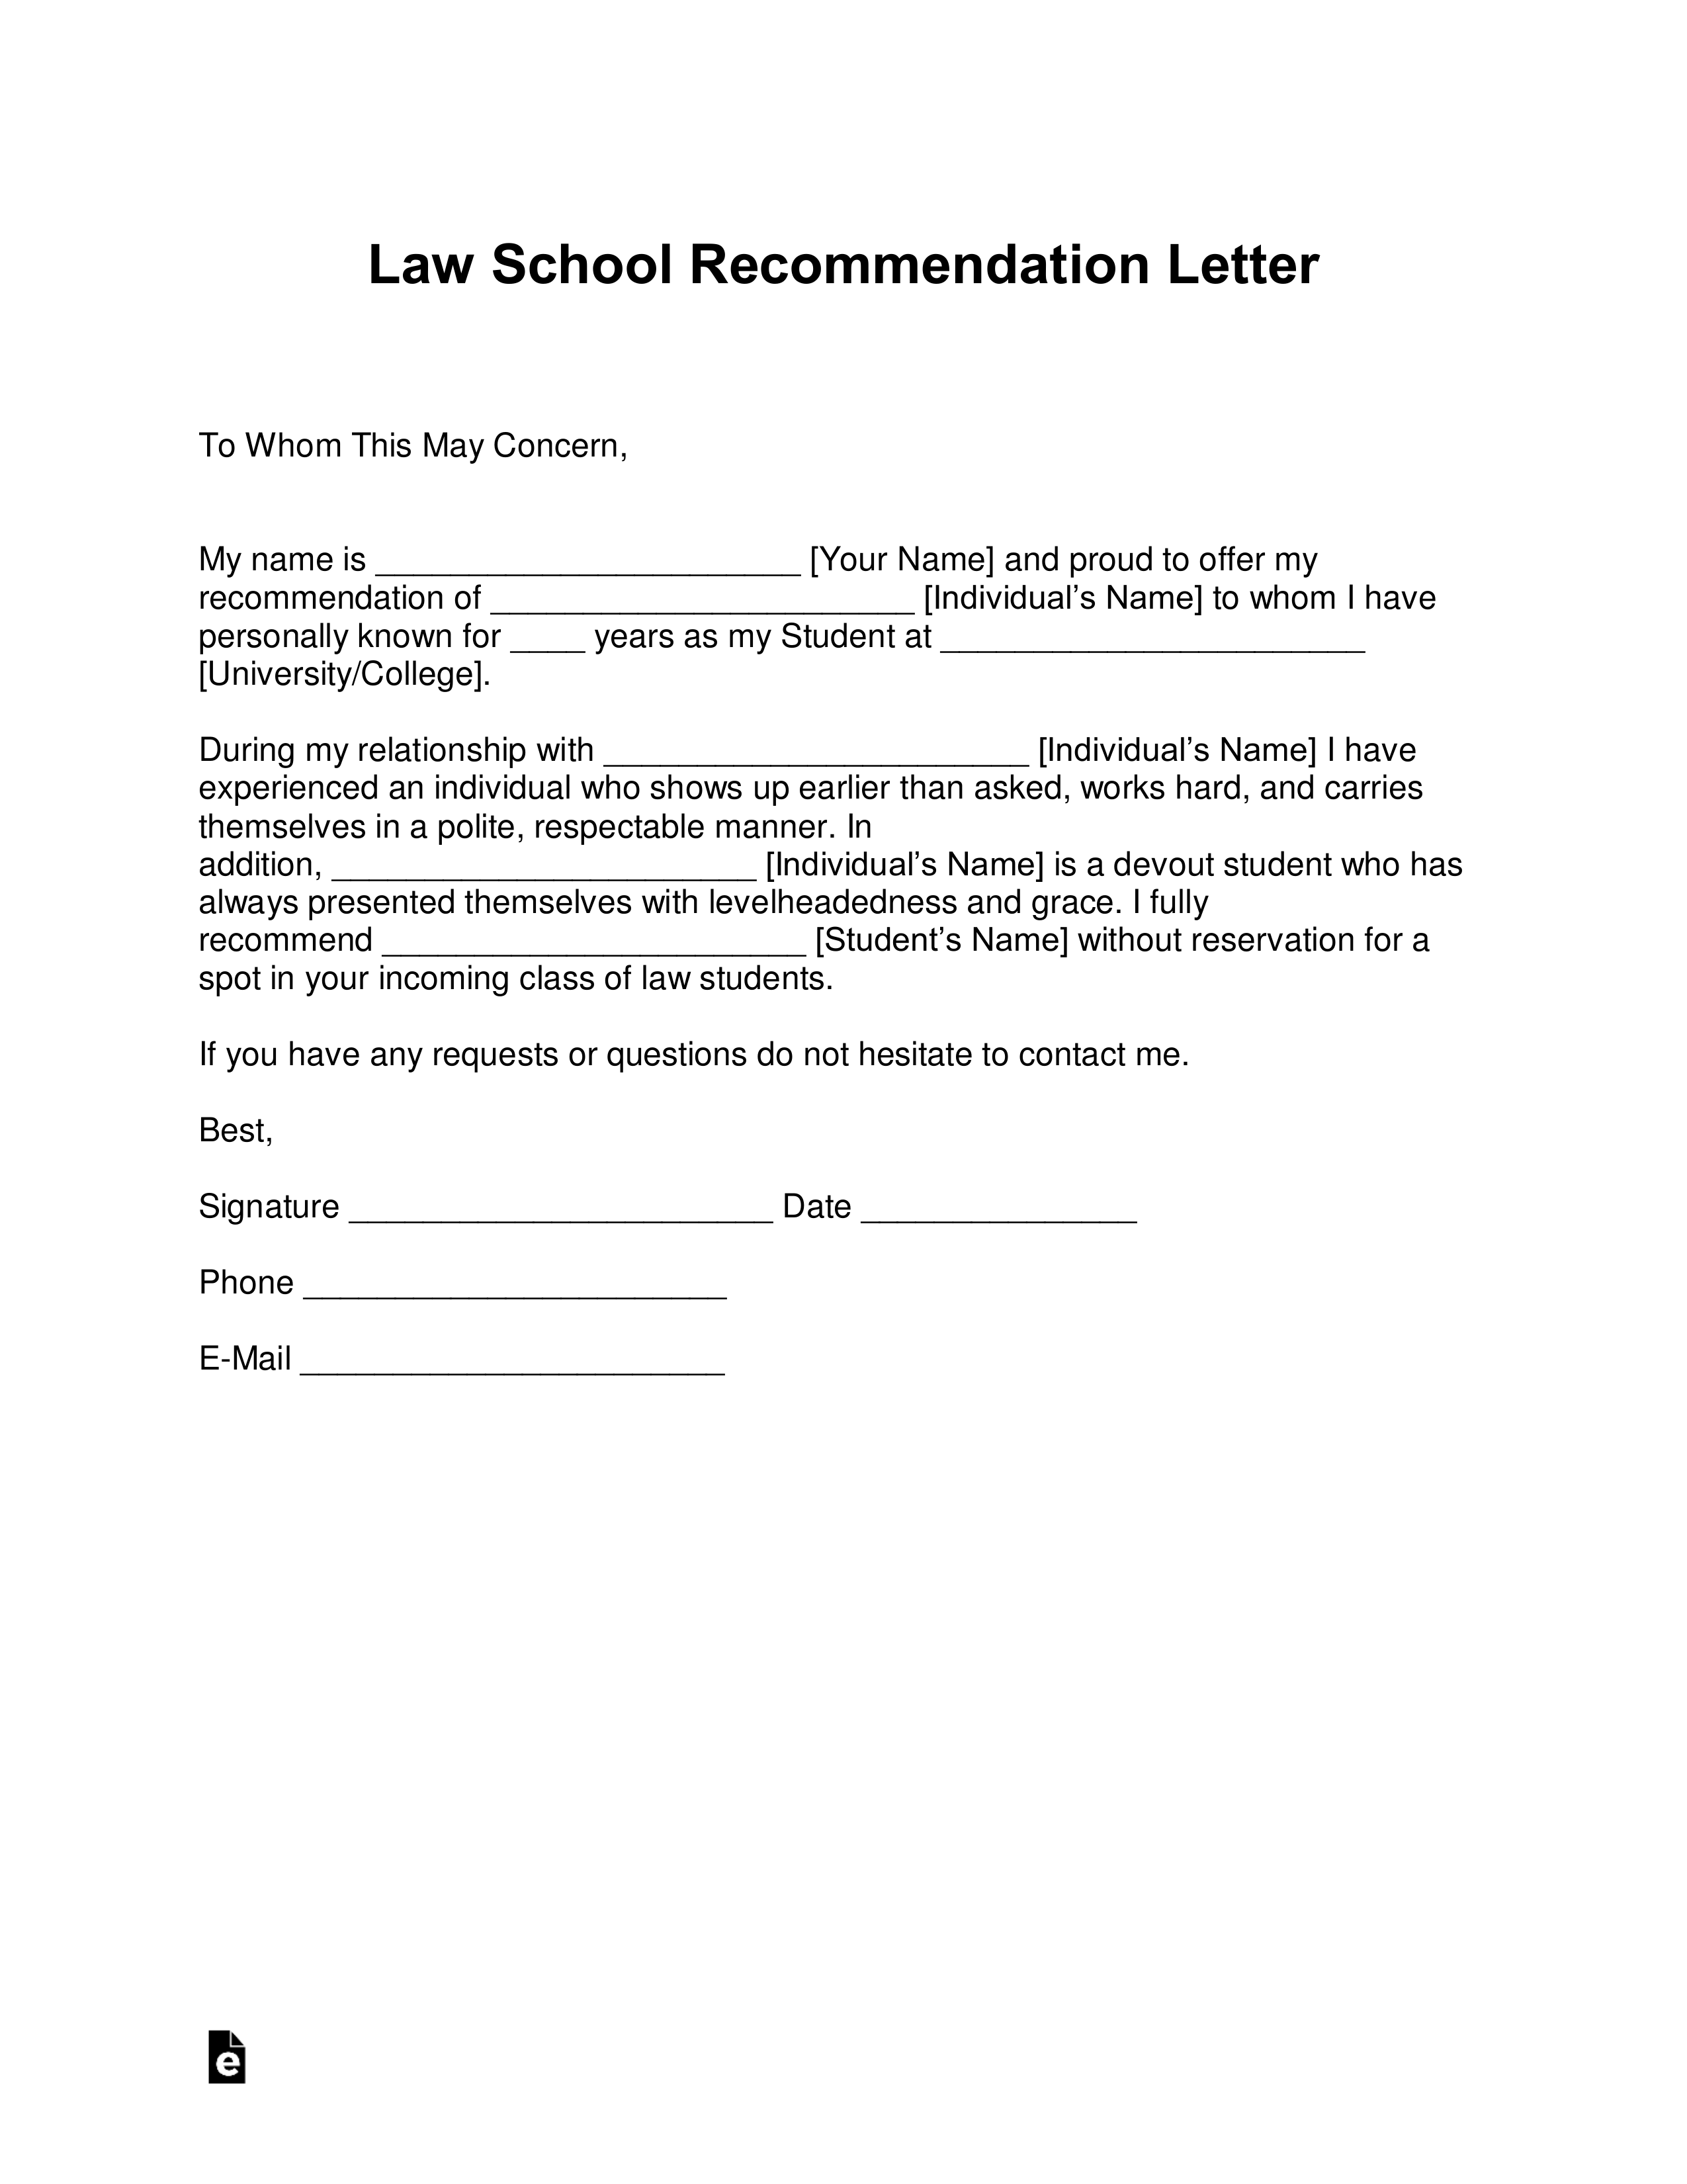 Asking For A Letter Of Recommendation Sample from eforms.com